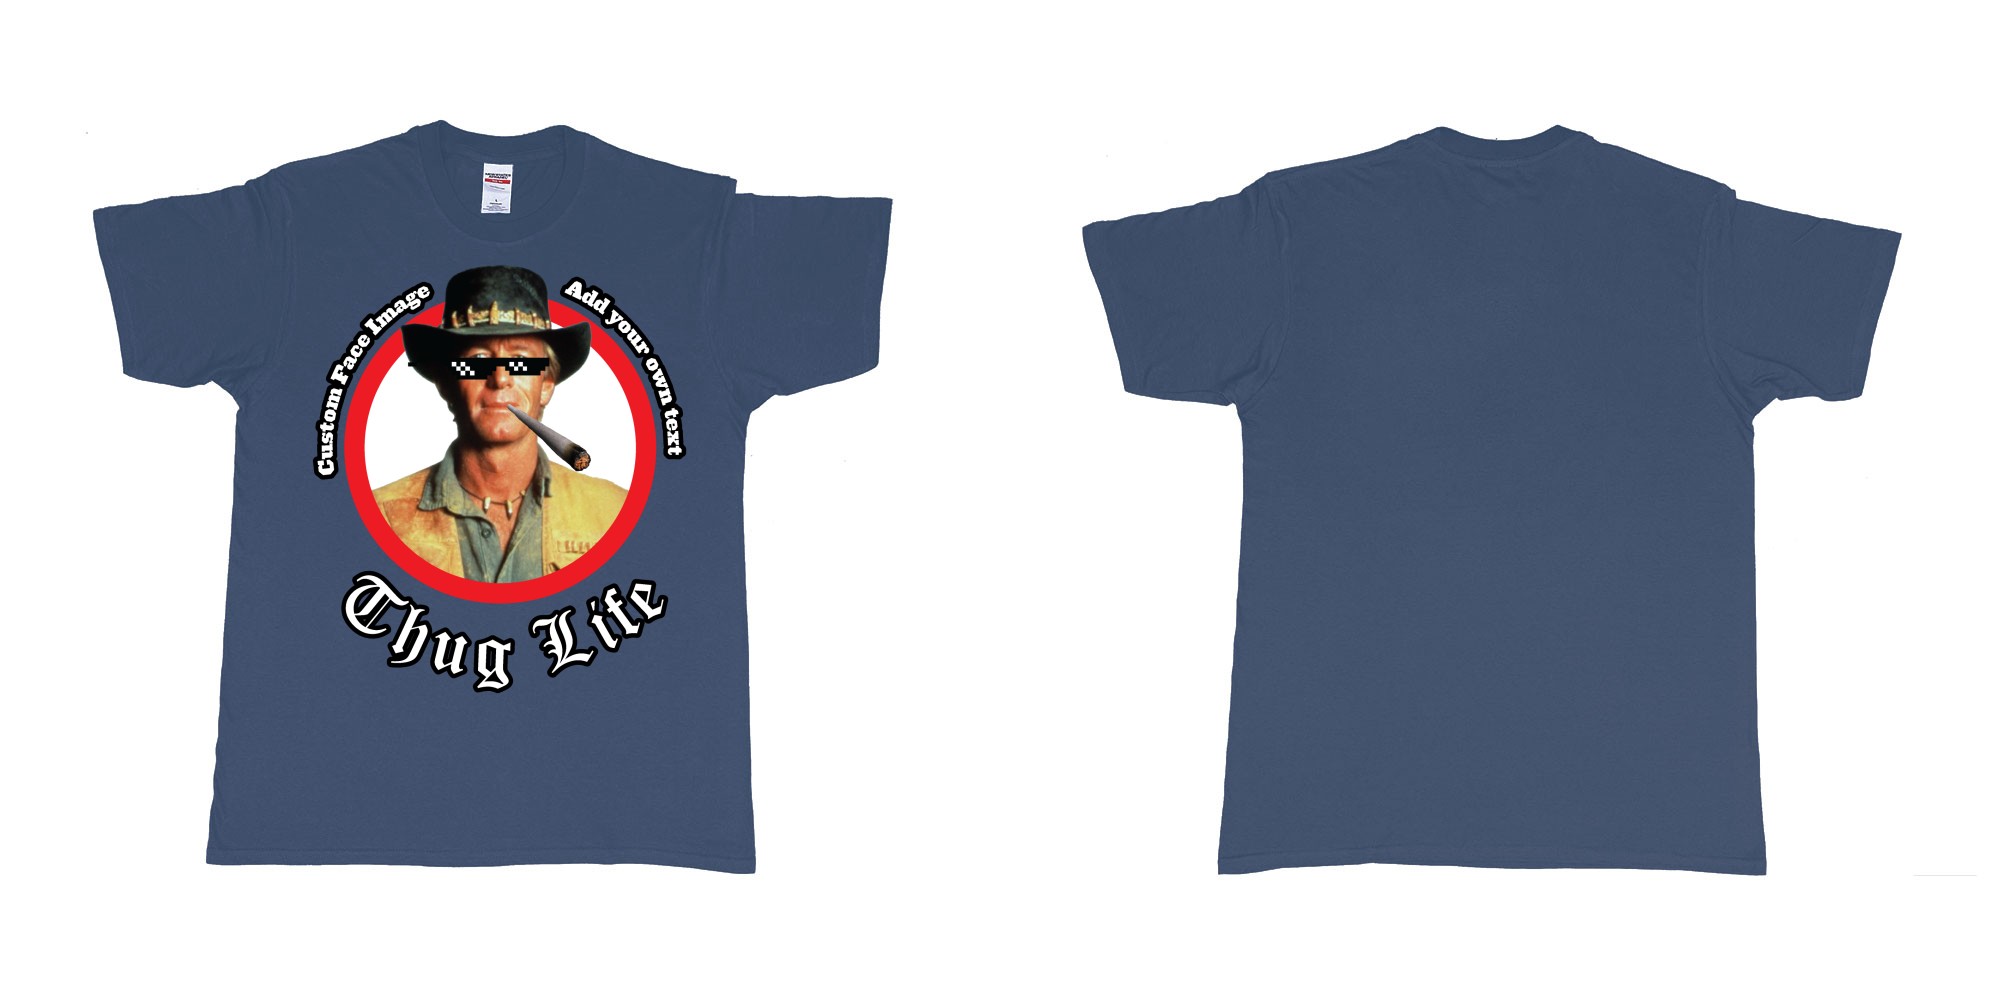 Custom tshirt design thug life meme sunglasses joint custom image in fabric color navy choice your own text made in Bali by The Pirate Way